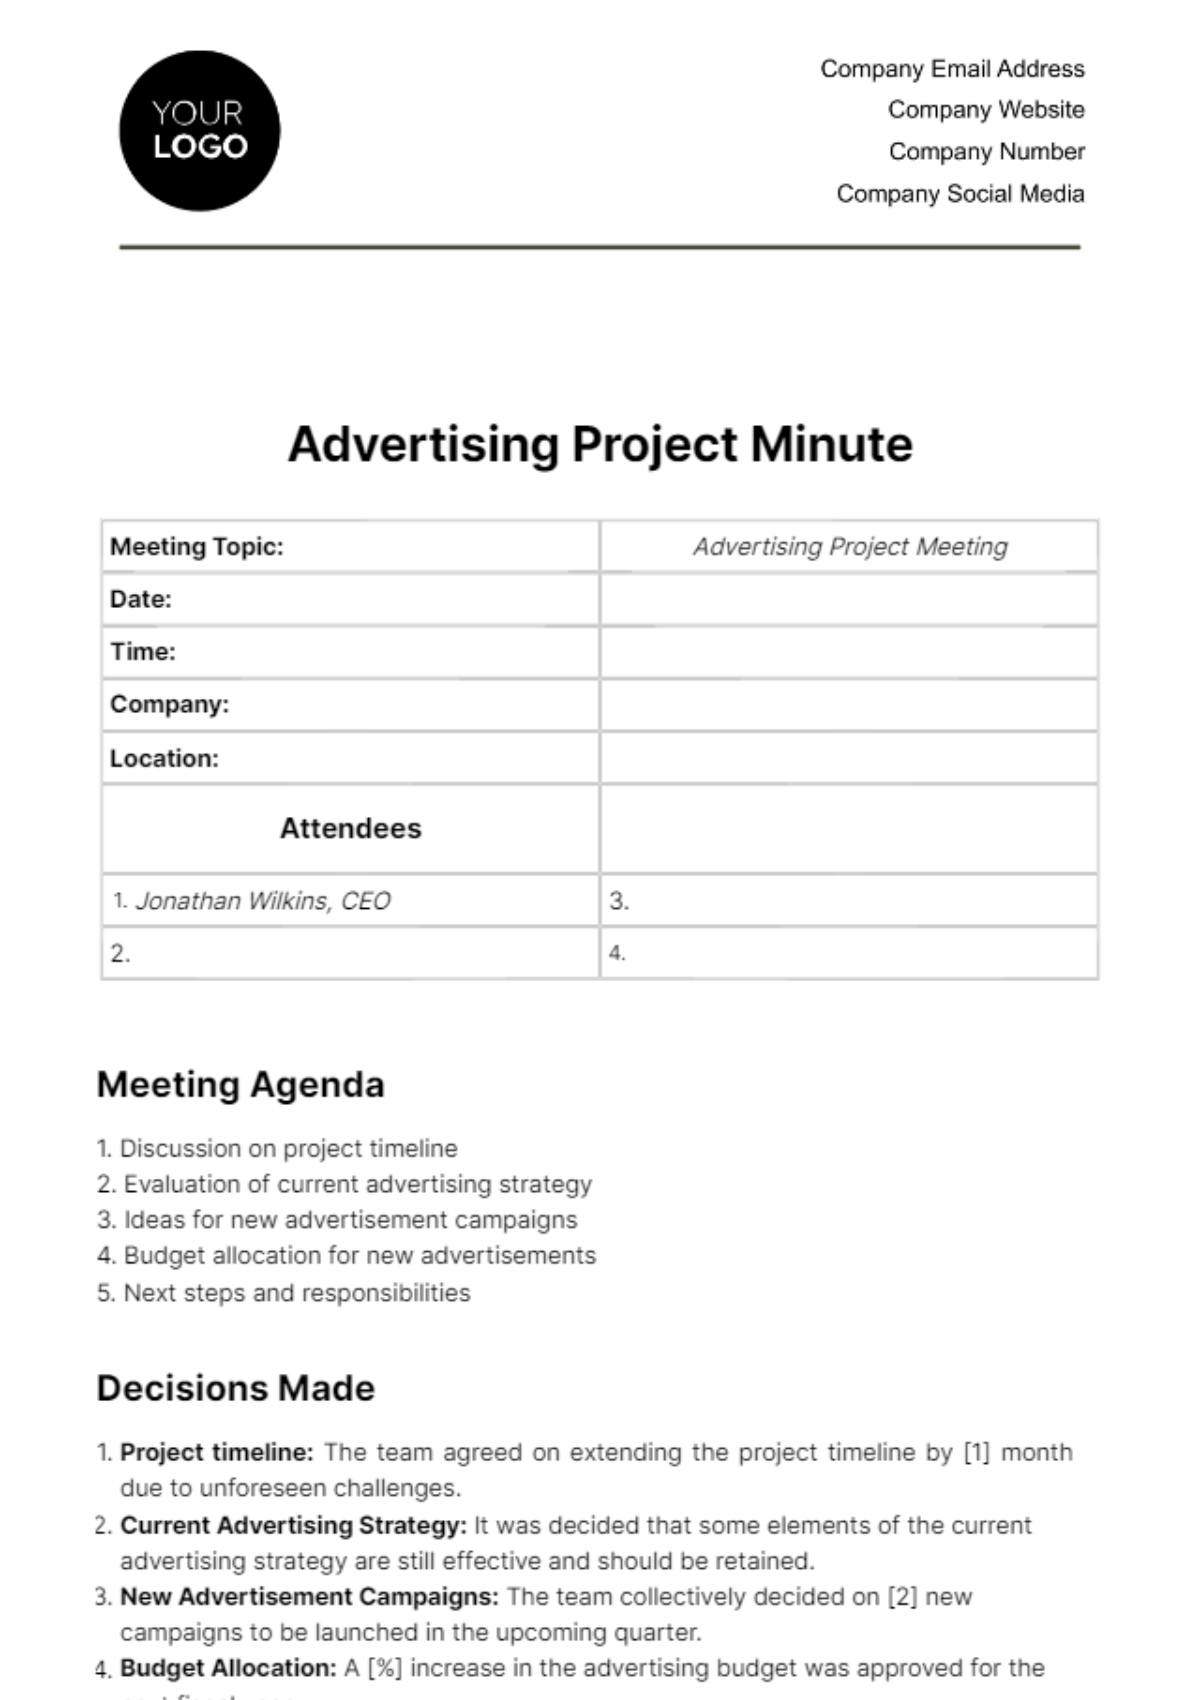 Free Advertising Project Minute Template